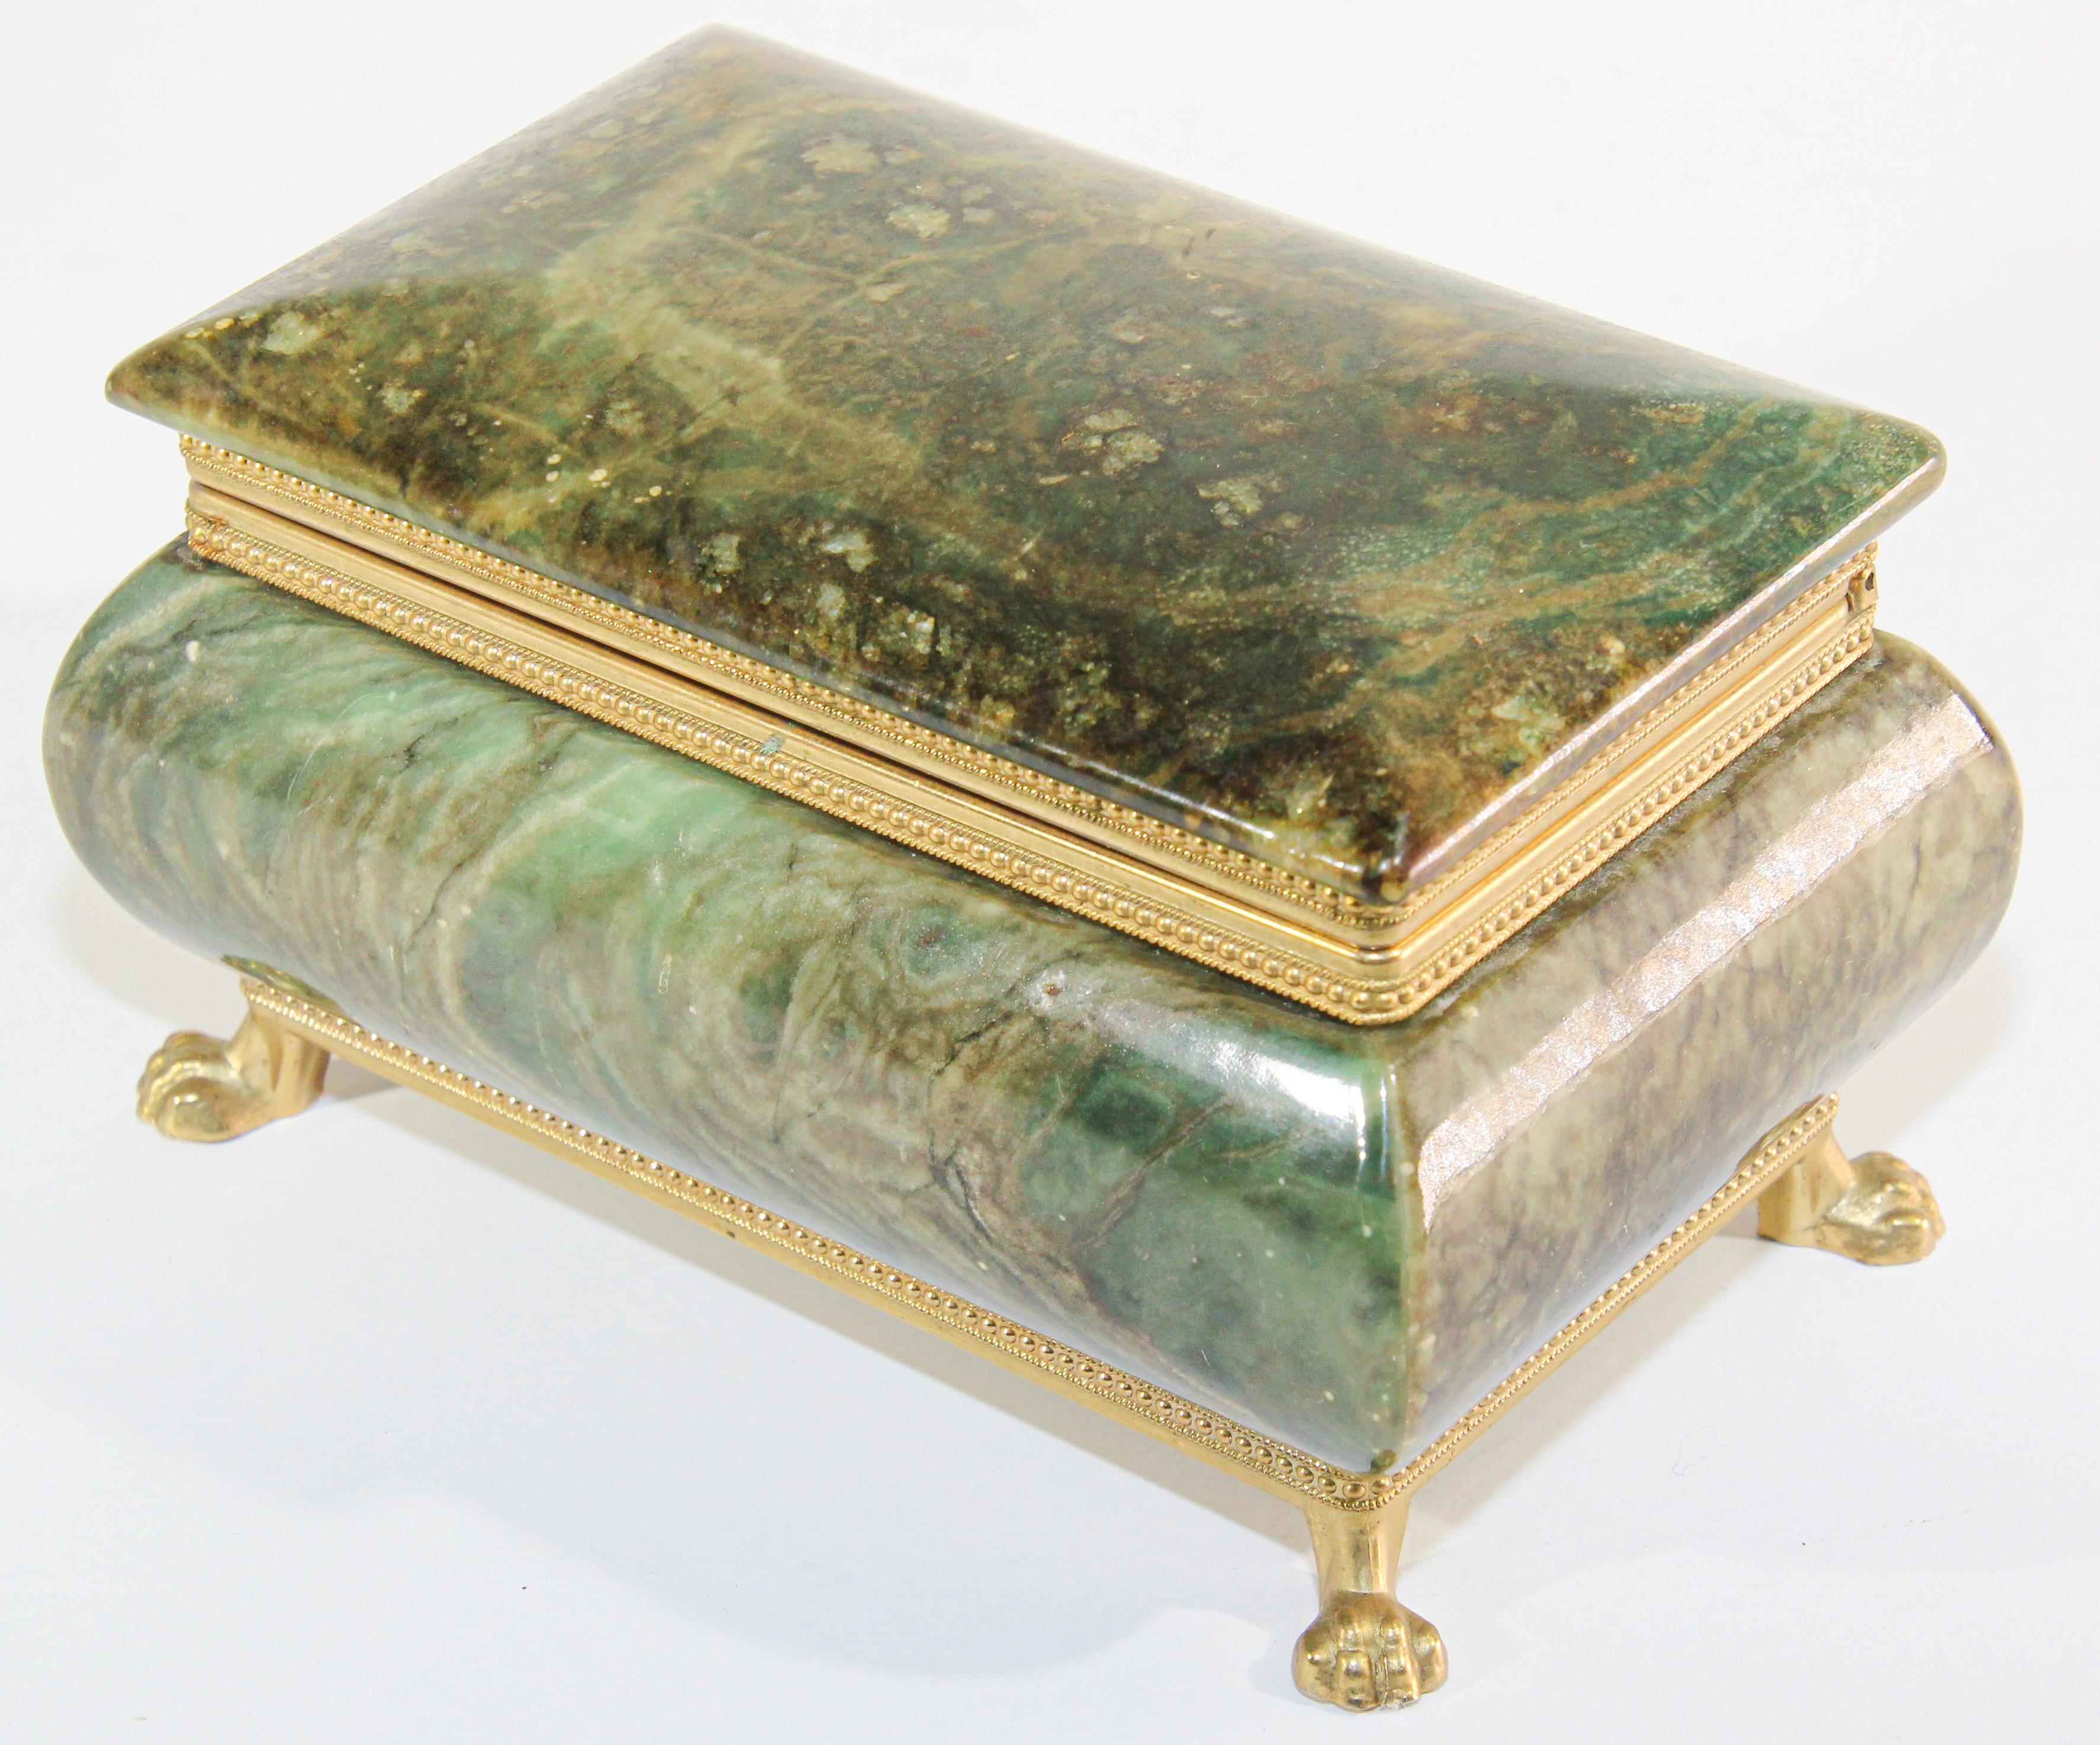 Hand carved green Italian alabaster claw footed decorative table box.
Beautiful jewelry box in green alabaster and gilded metal, rectangular in shape.
Elegant mid century alabaster dressing table jewellery box with a hinged lid. 
It has bombe